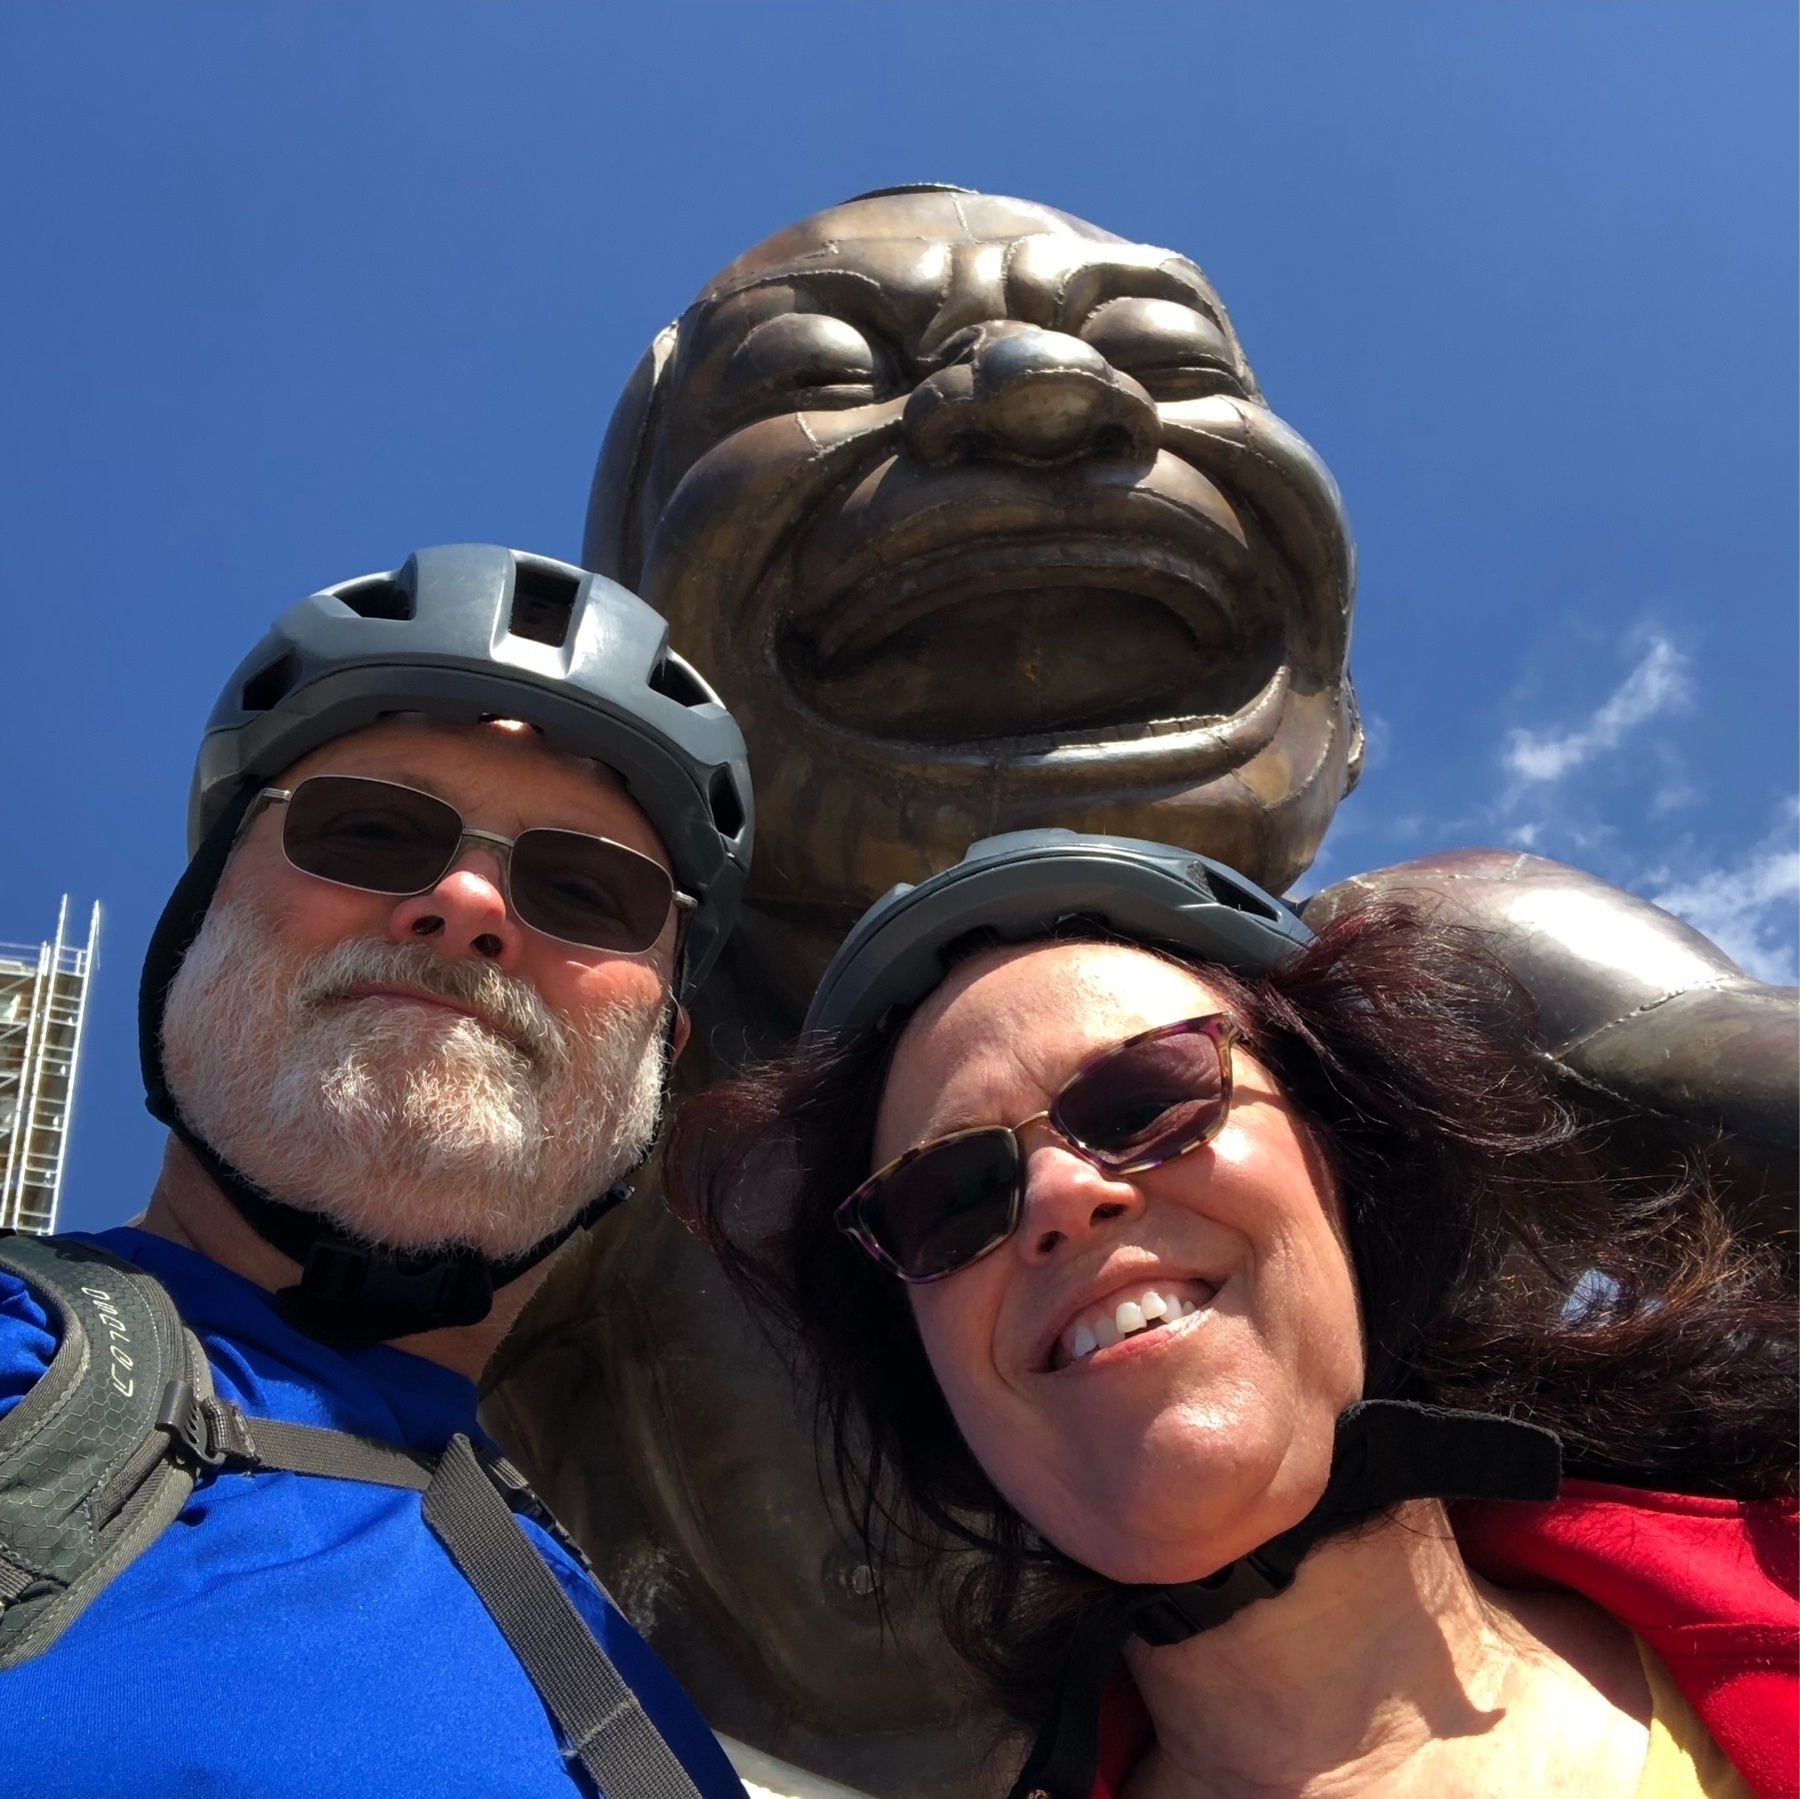 two people in bicycle helmets in front of bronze statue of man laughing 